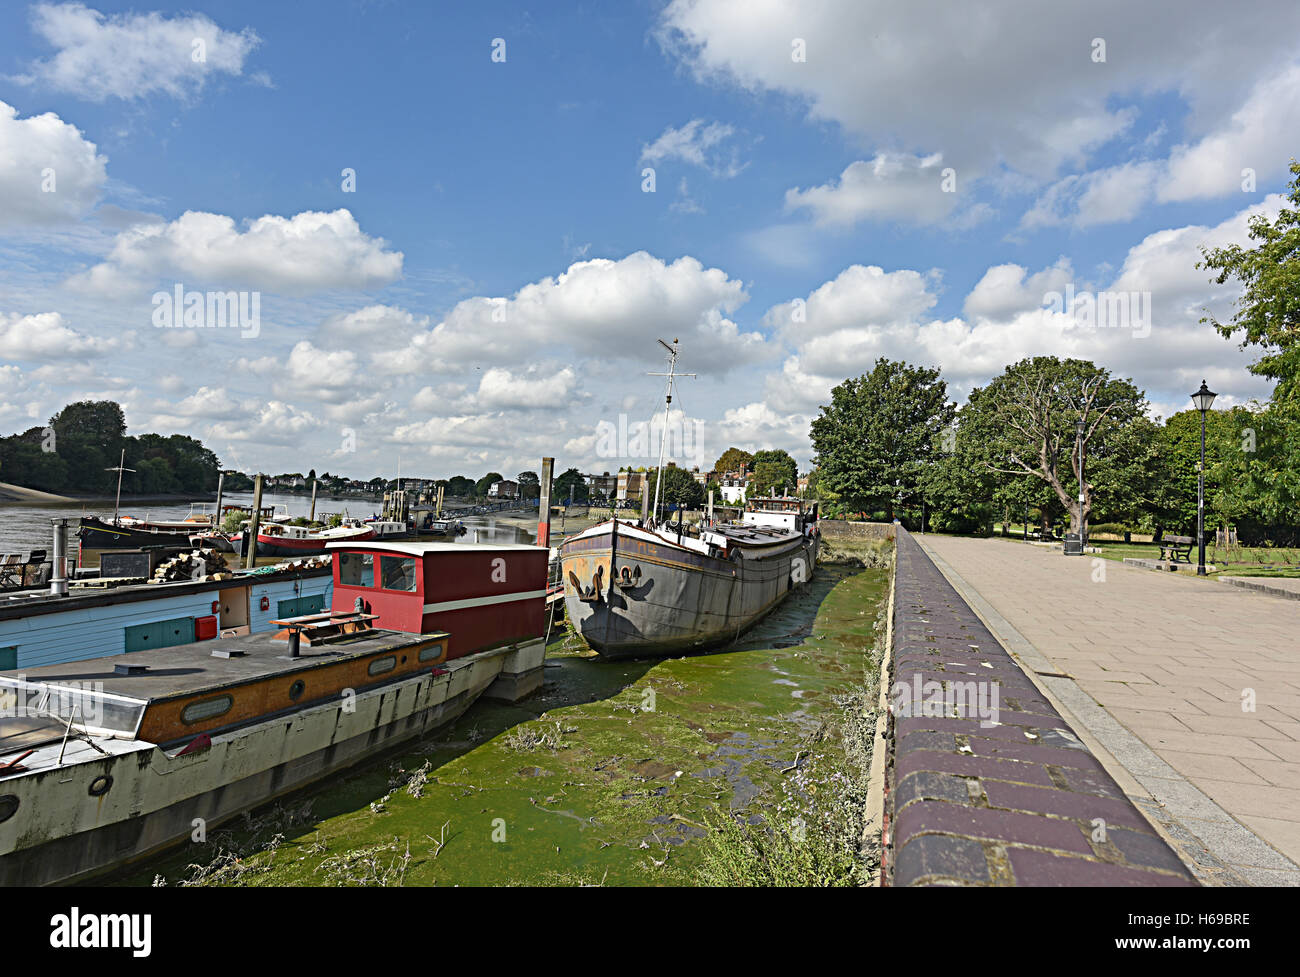 Thames Path mit Booten entlang des Flusses in Hammersmith angedockt. Stockfoto